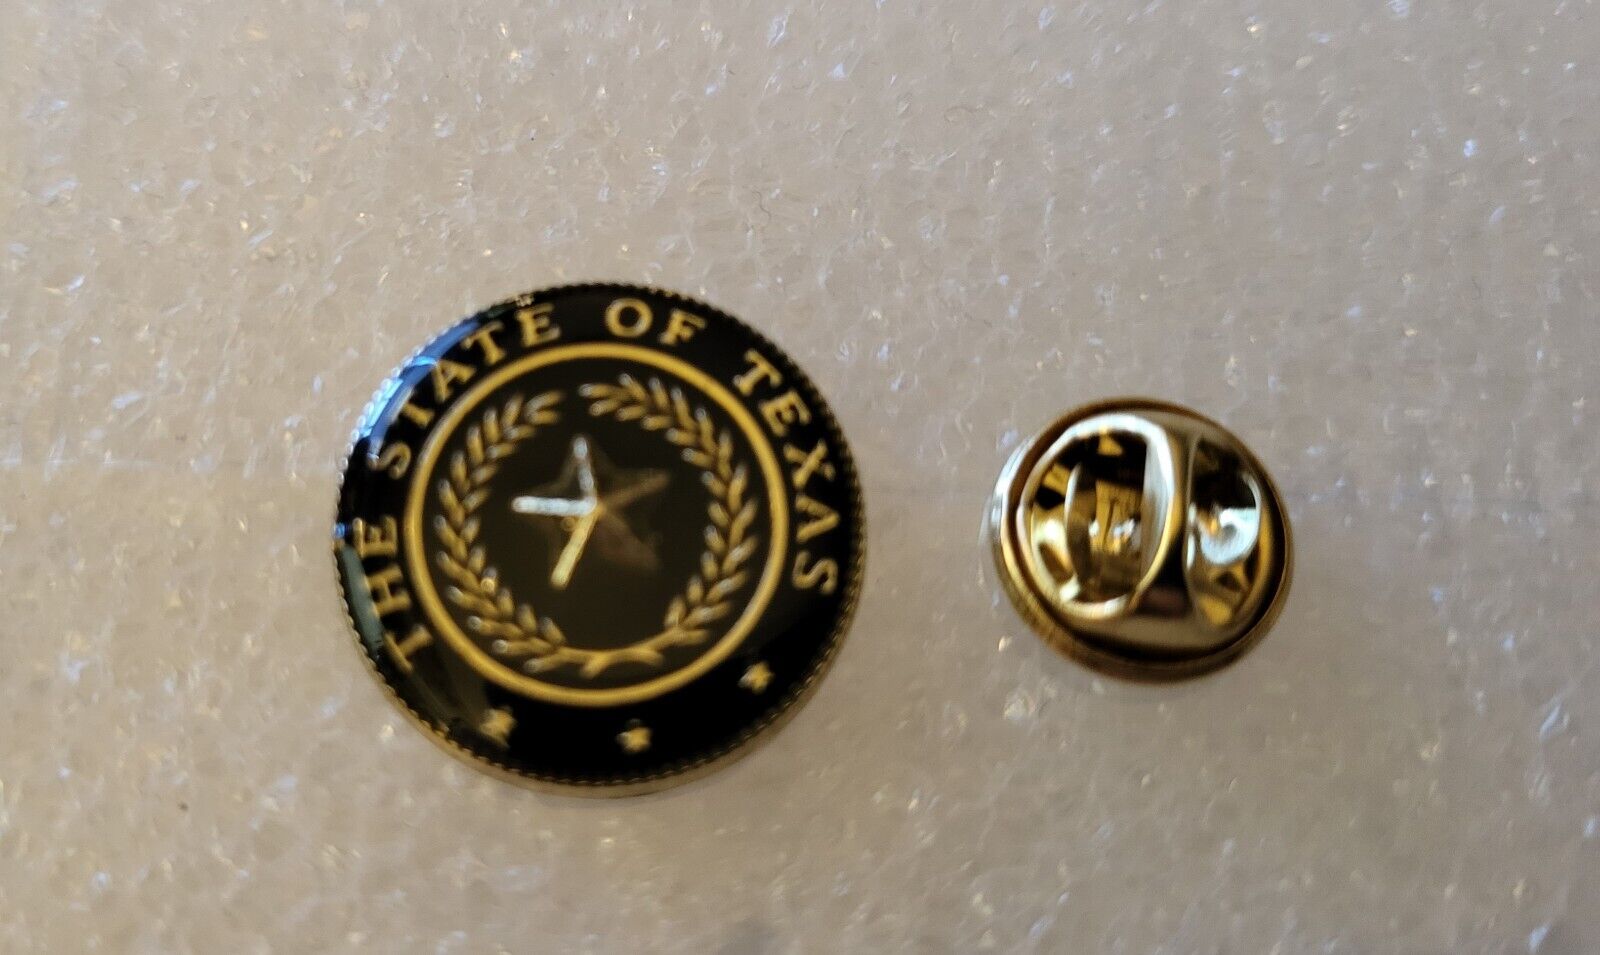 The State Of Texas Seal Round Lapel Pin 